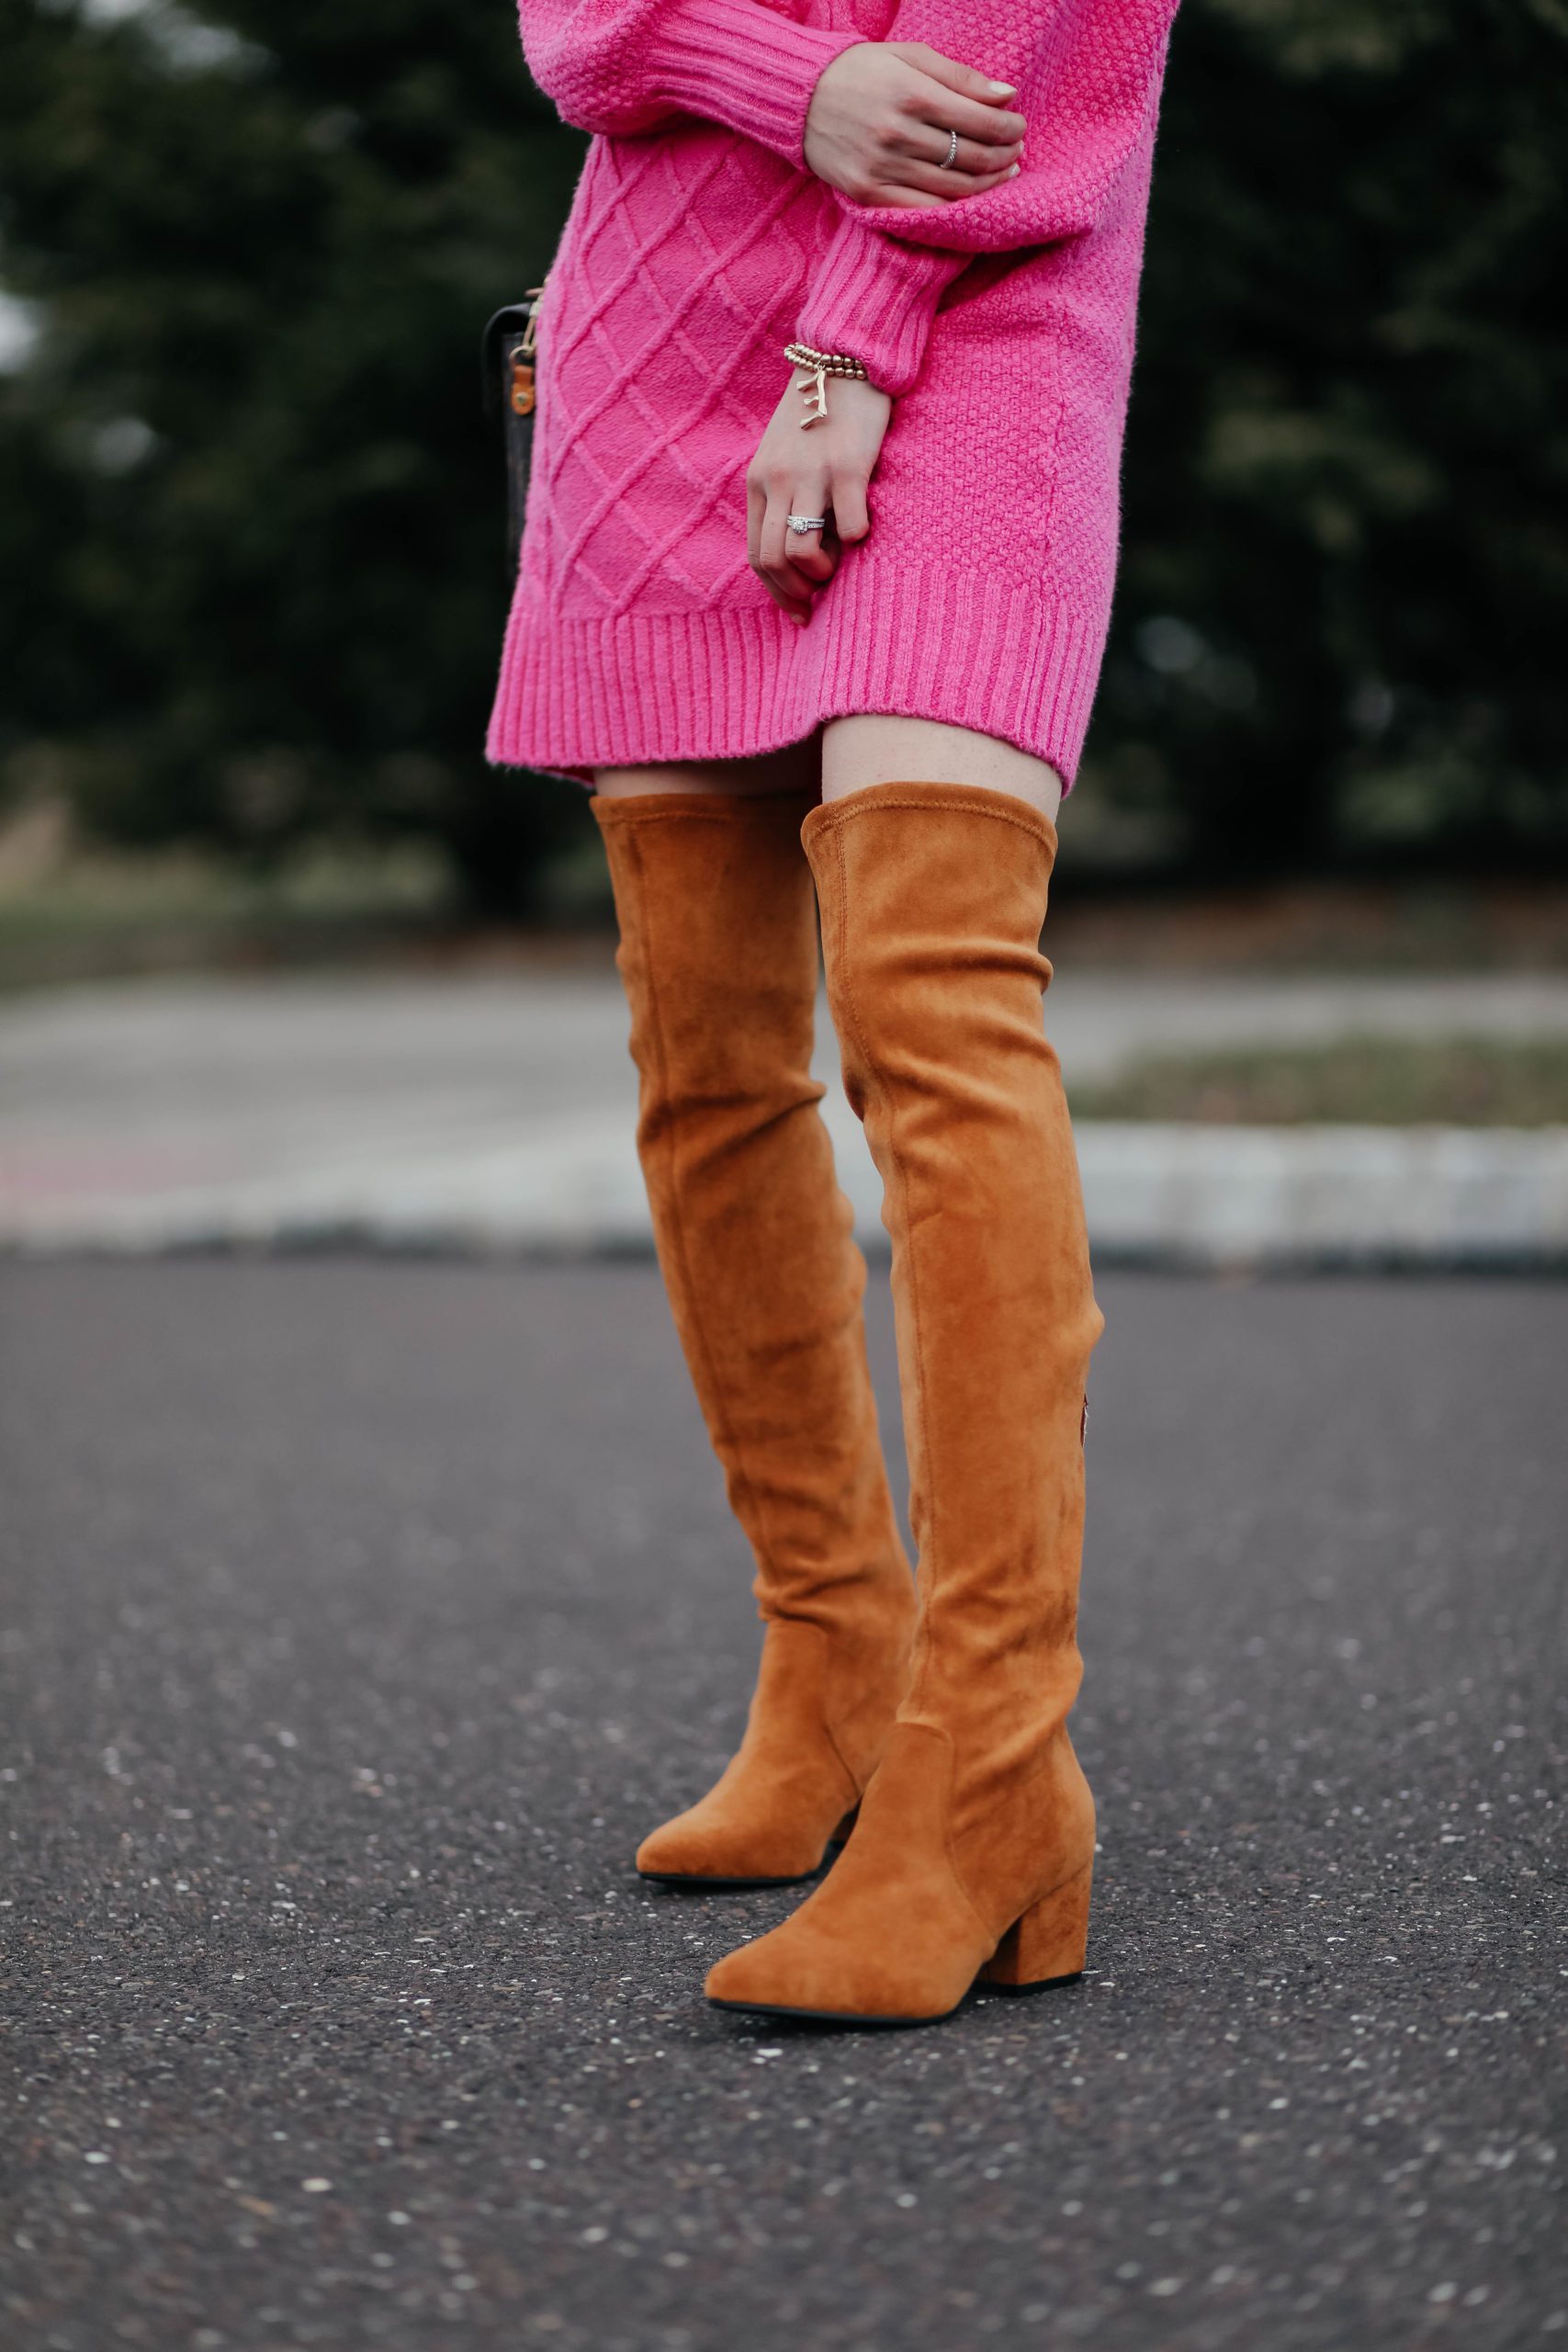 Pink Sweater Dress - Sweater Dress Outfit, American Eagle sweater dress, Goodnight Macaroon over-the-knee boots, #AskE Q&A post on Coming Up Roses